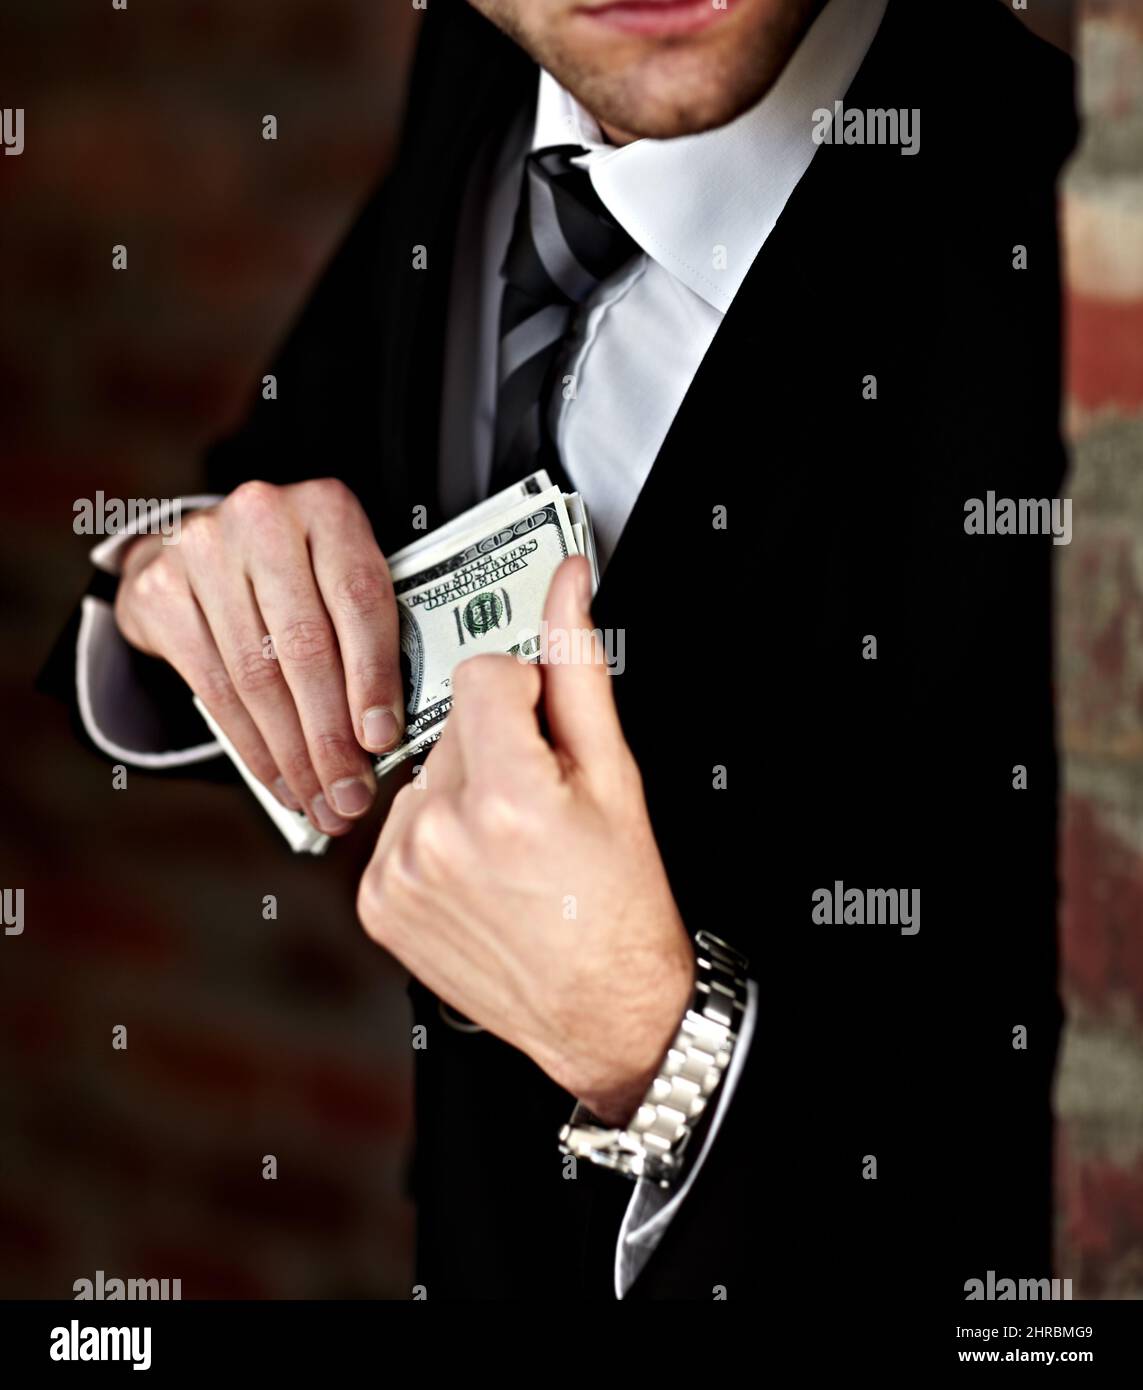 Hes got his payoff. Cropped shot of a man tucking a wad of cash into his jacket. Stock Photo